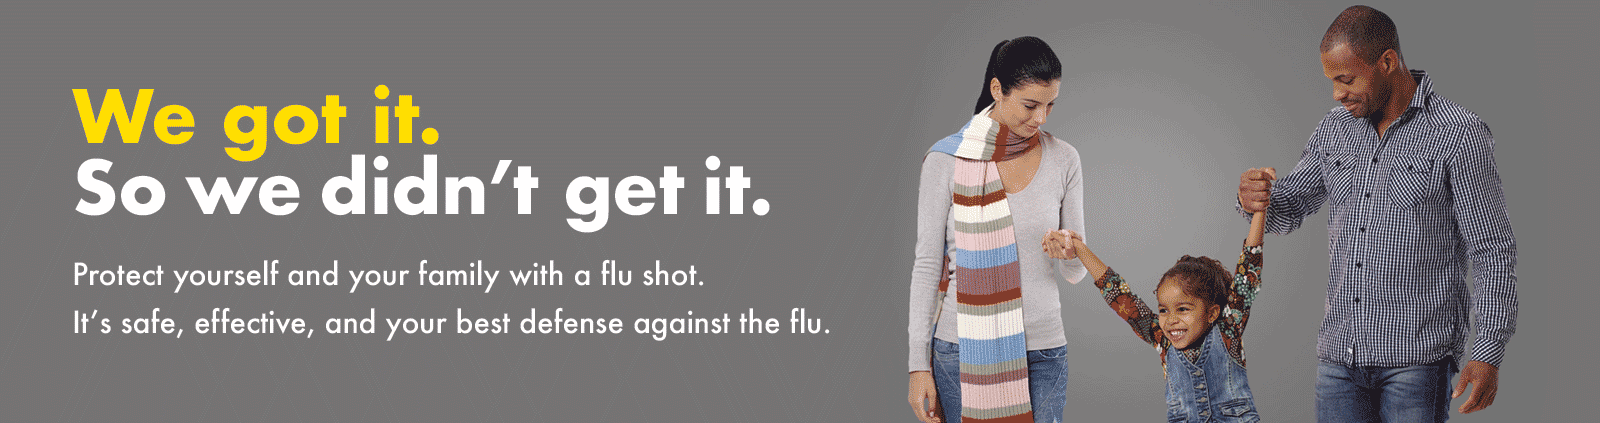 We got it. So we didn't get it. - Protect yourself and your family with a flu shot. It's safe, effective, and your best defense against the flu.